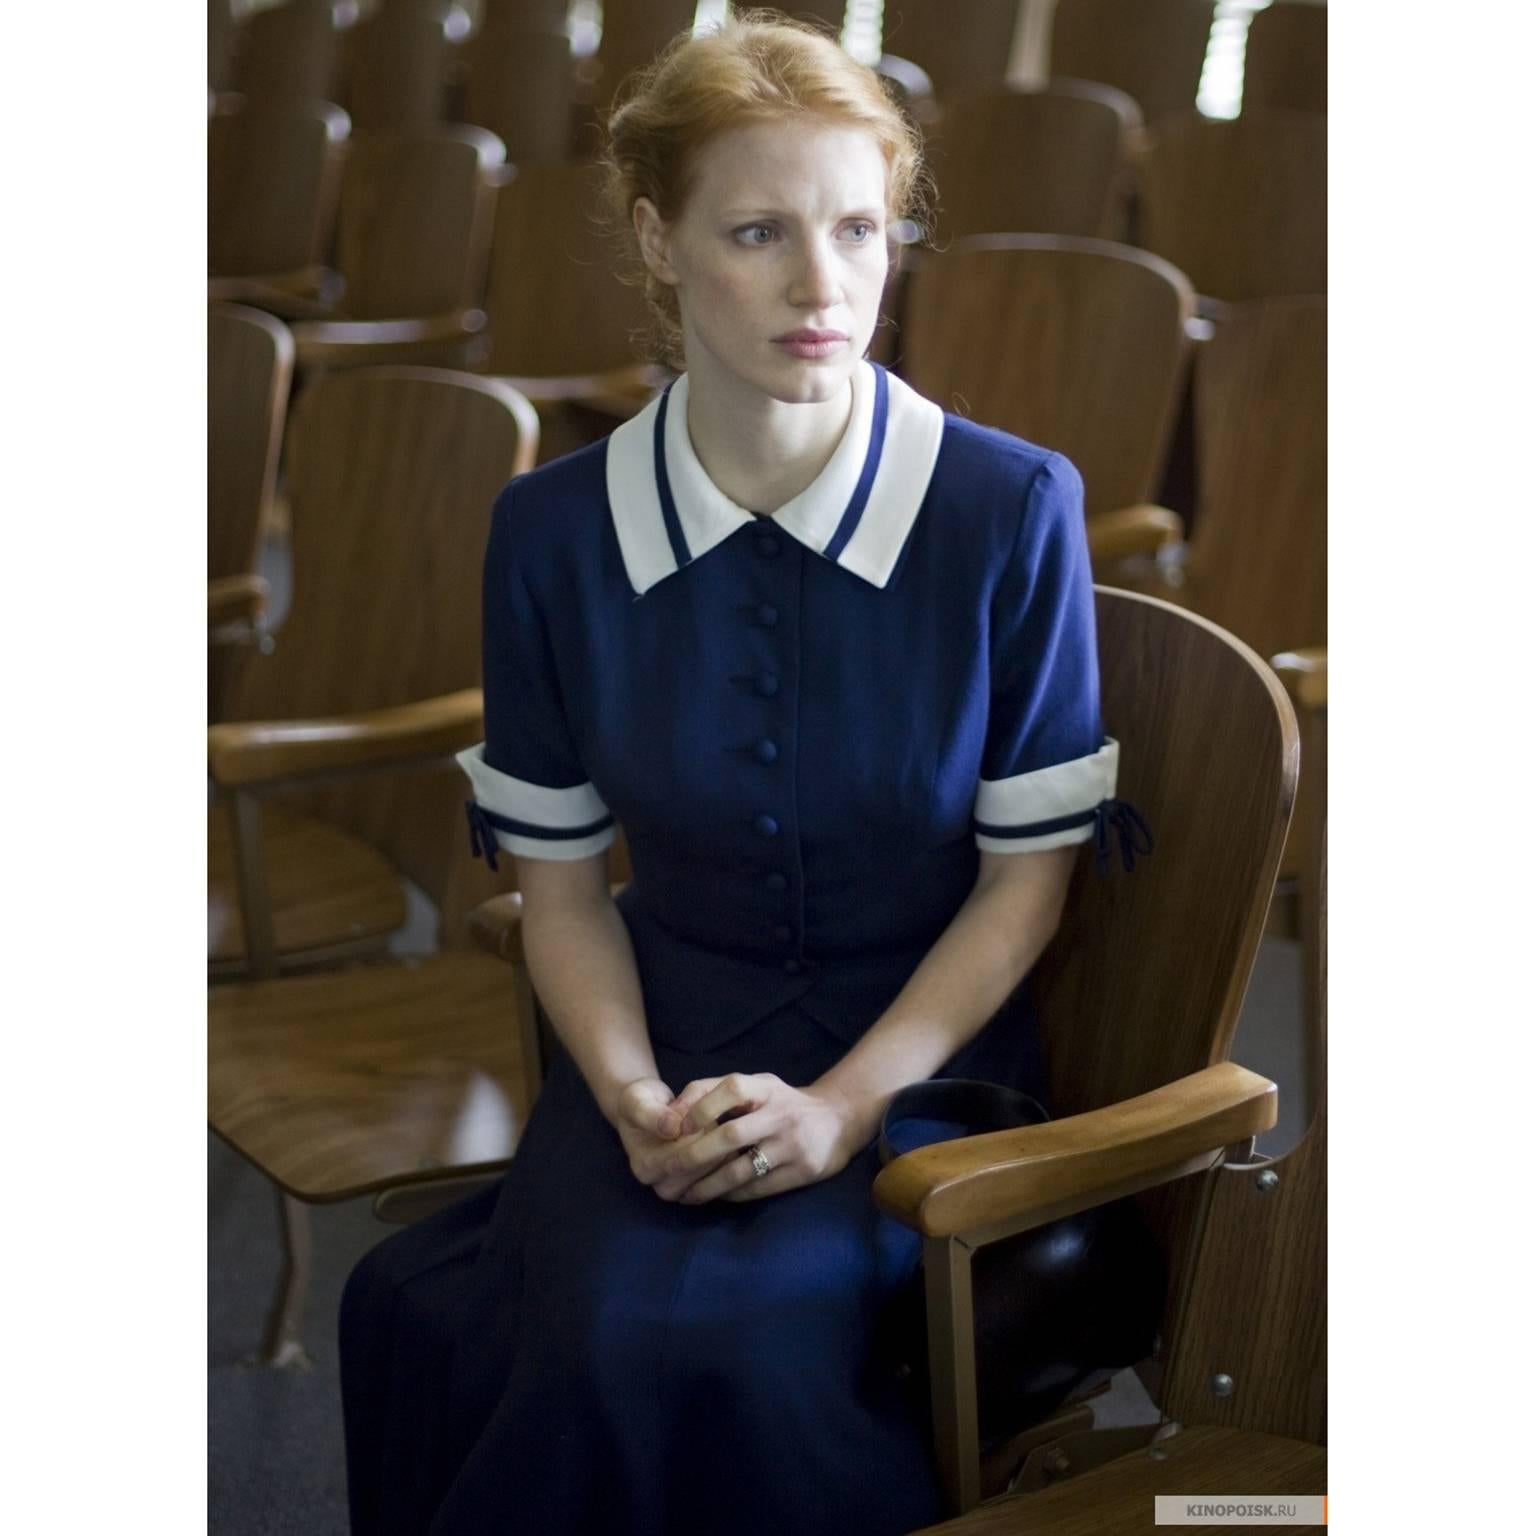 This late 1940's or early 1950's JoDee pretty two piece dress was one of the items we loaned to the costume department of the movie The Tree of Life for the lead actress, Jessica Chastain.  We have included a photograph of Jessica in the dress. 